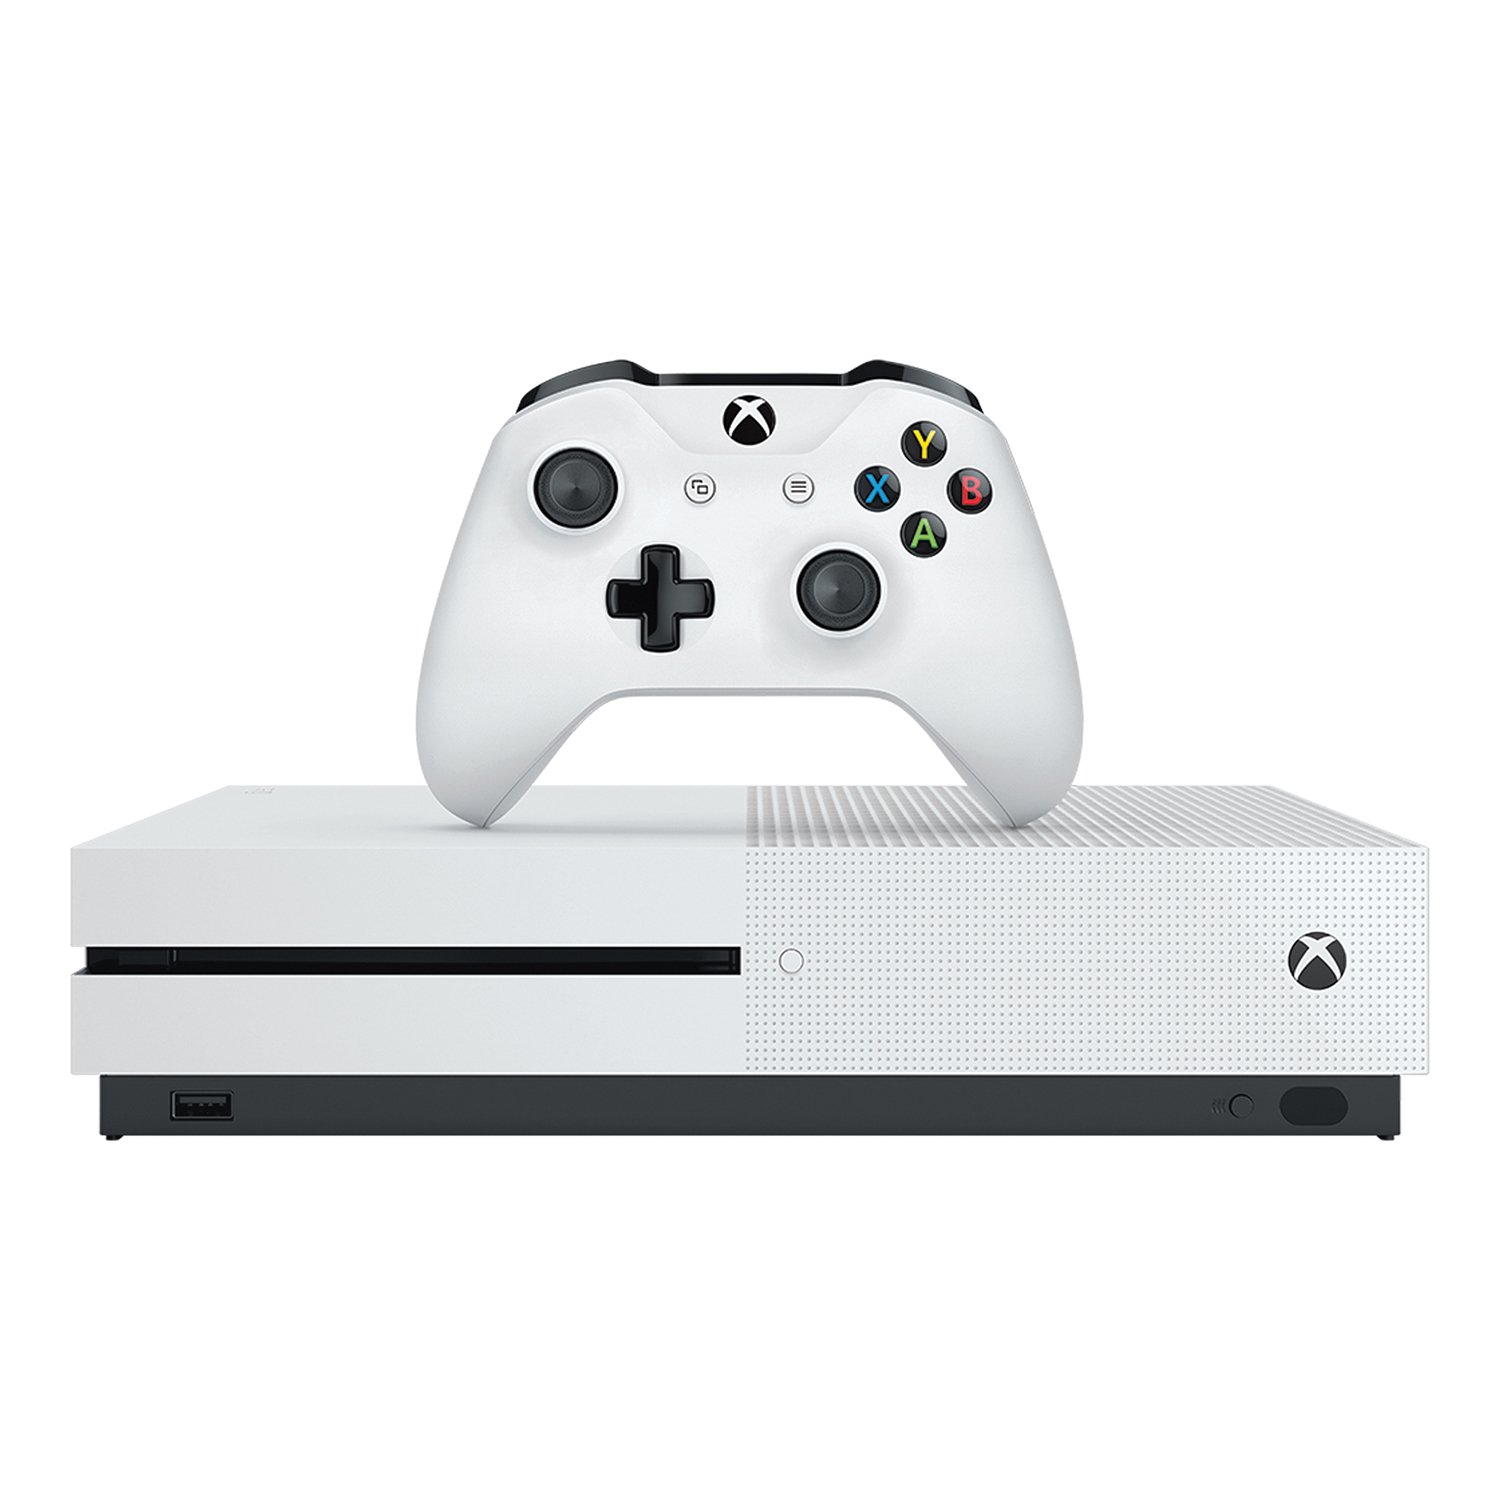 Xbox One X compared to the One S : r/xboxone